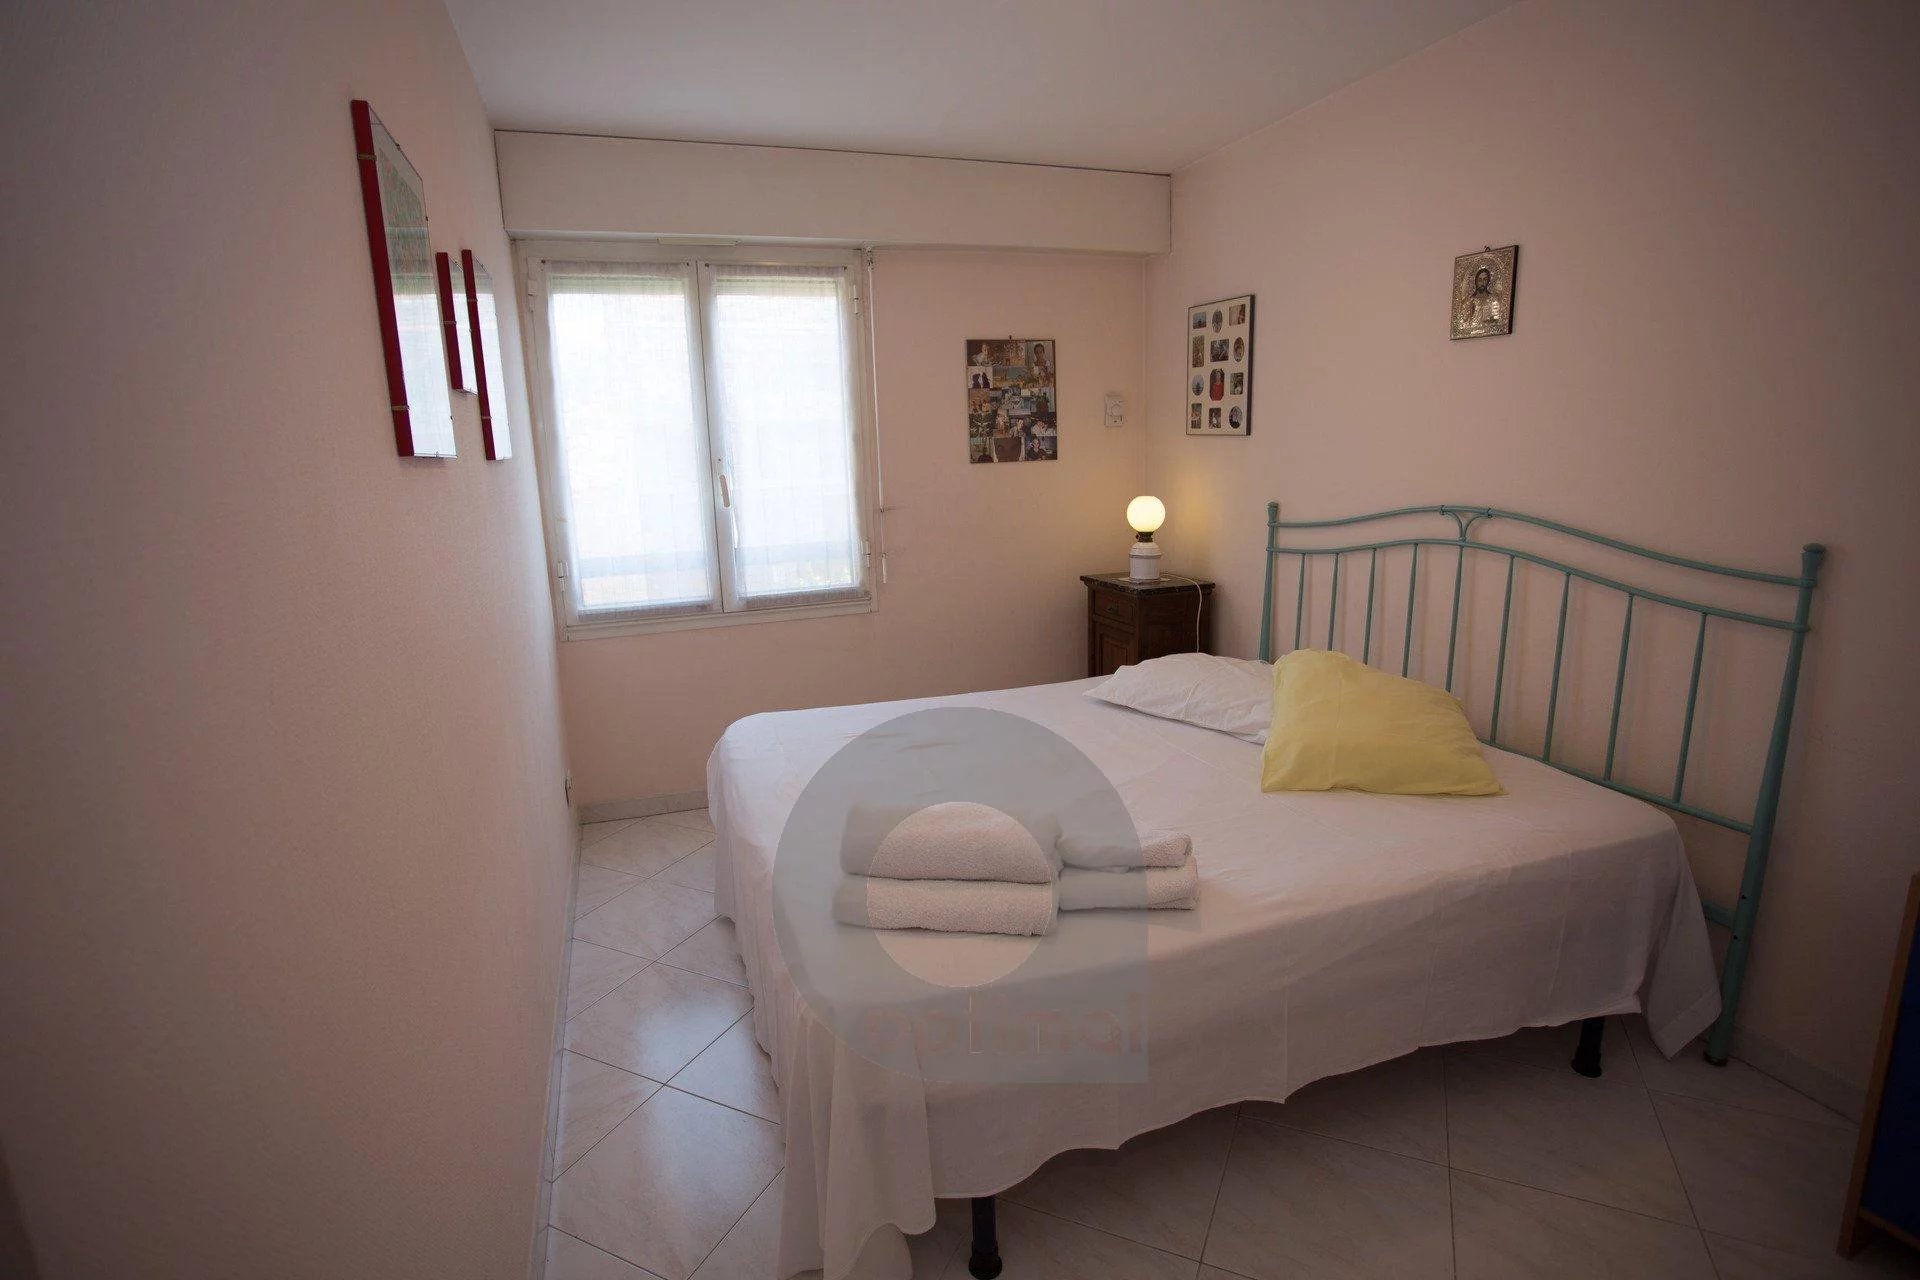 In a city center close to the beach with private parking and quiet terrace